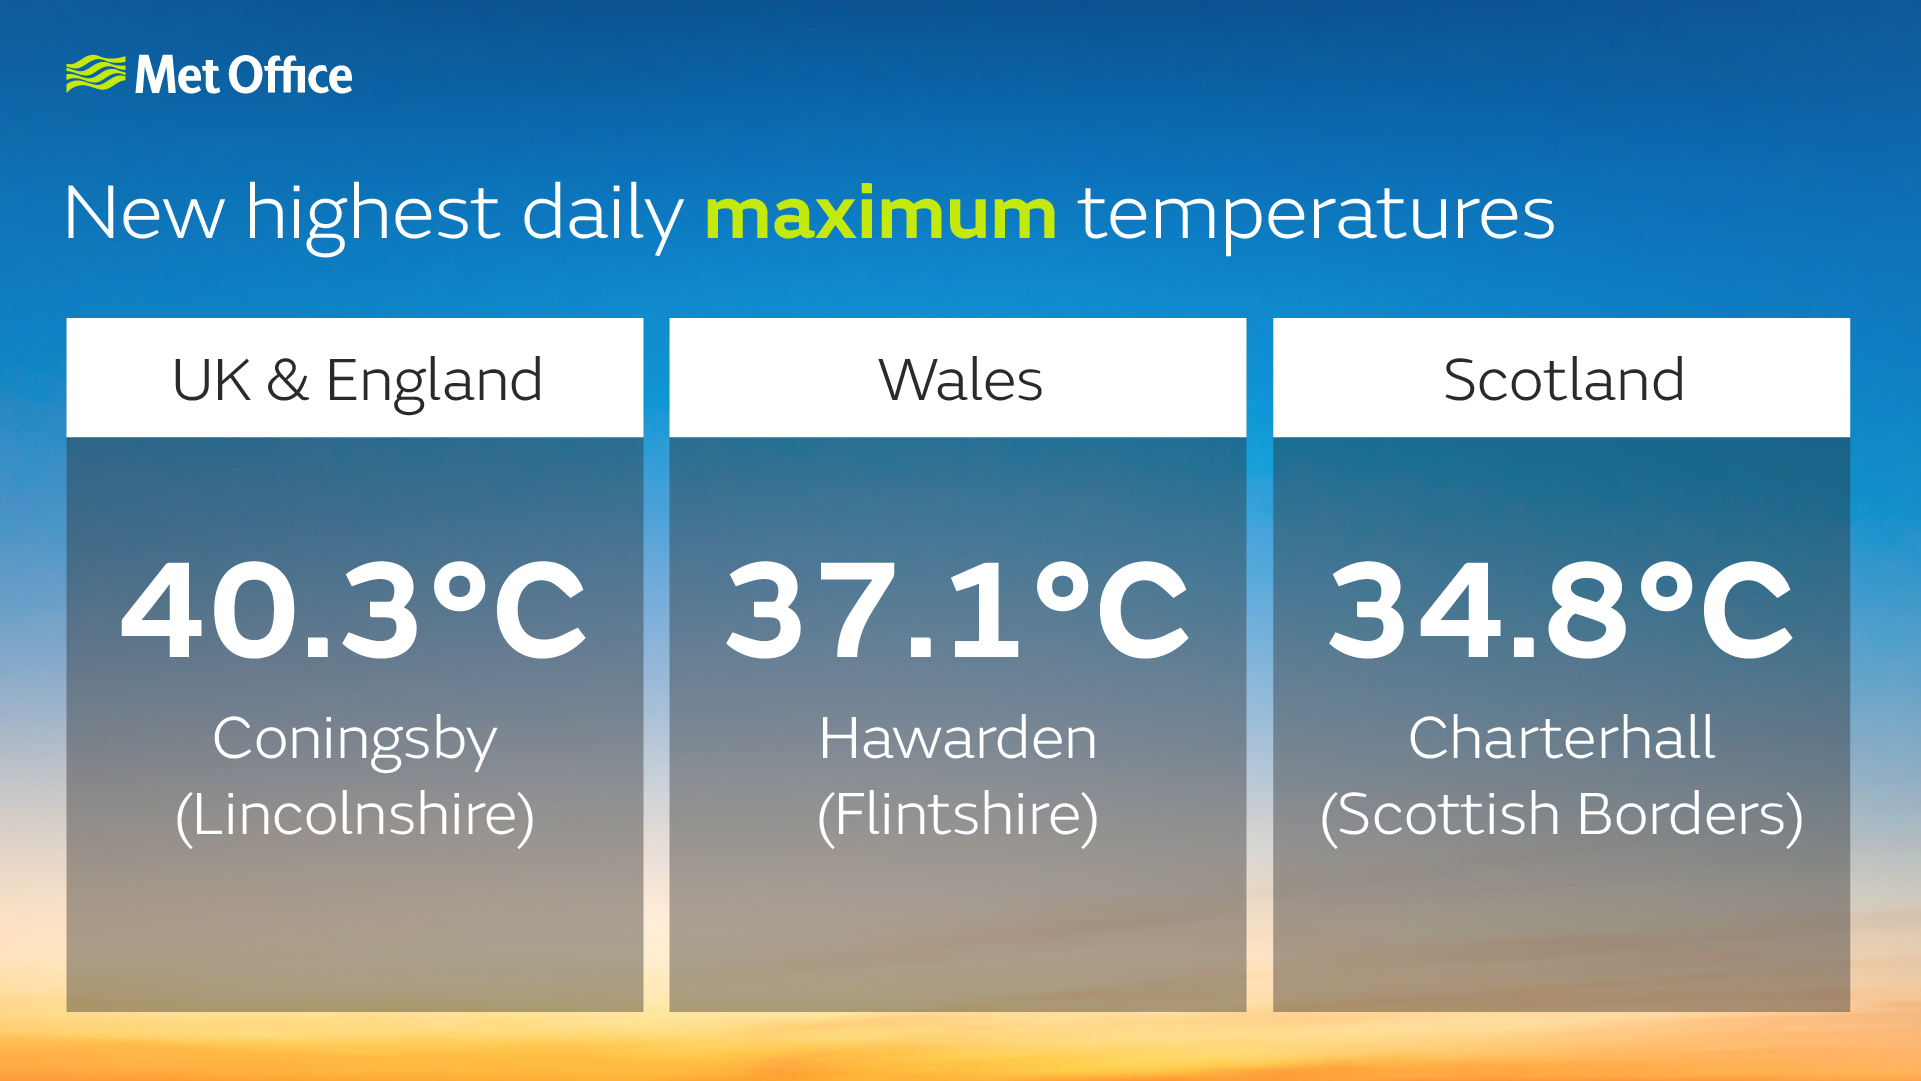 New highest daily maximum temps. UK and England - 40.3C at Coningsby. Wales - 37.1C at Hawarden. Scotland - 34.8C at Charterhall.